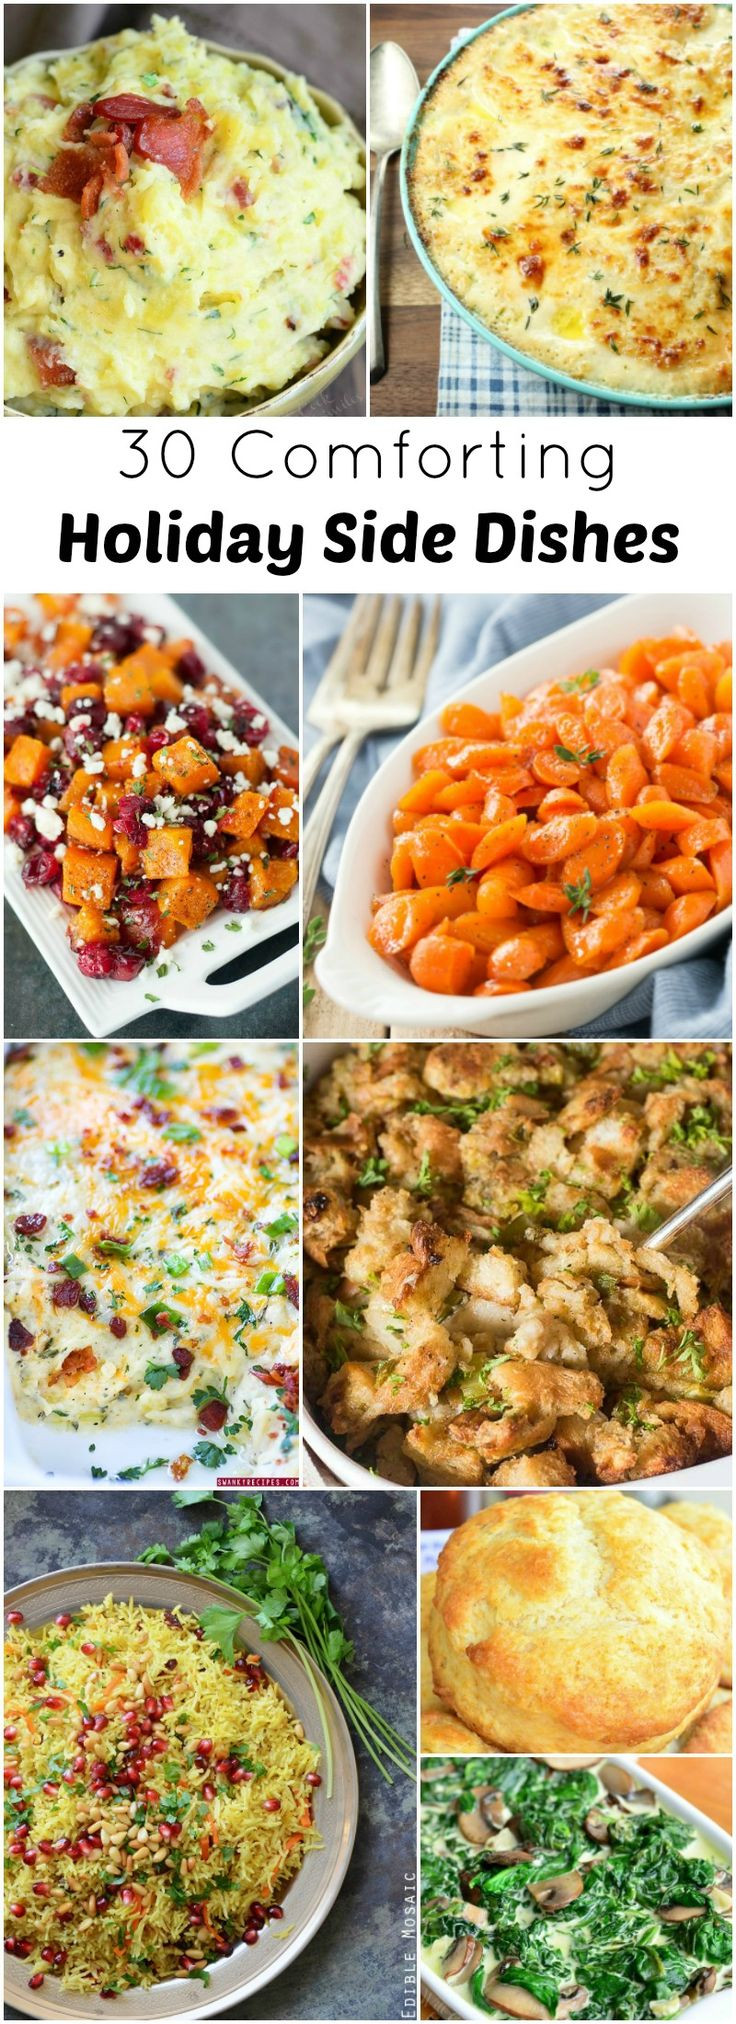 Sides For Christmas Dinner
 17 Best ideas about Holiday Side Dishes on Pinterest